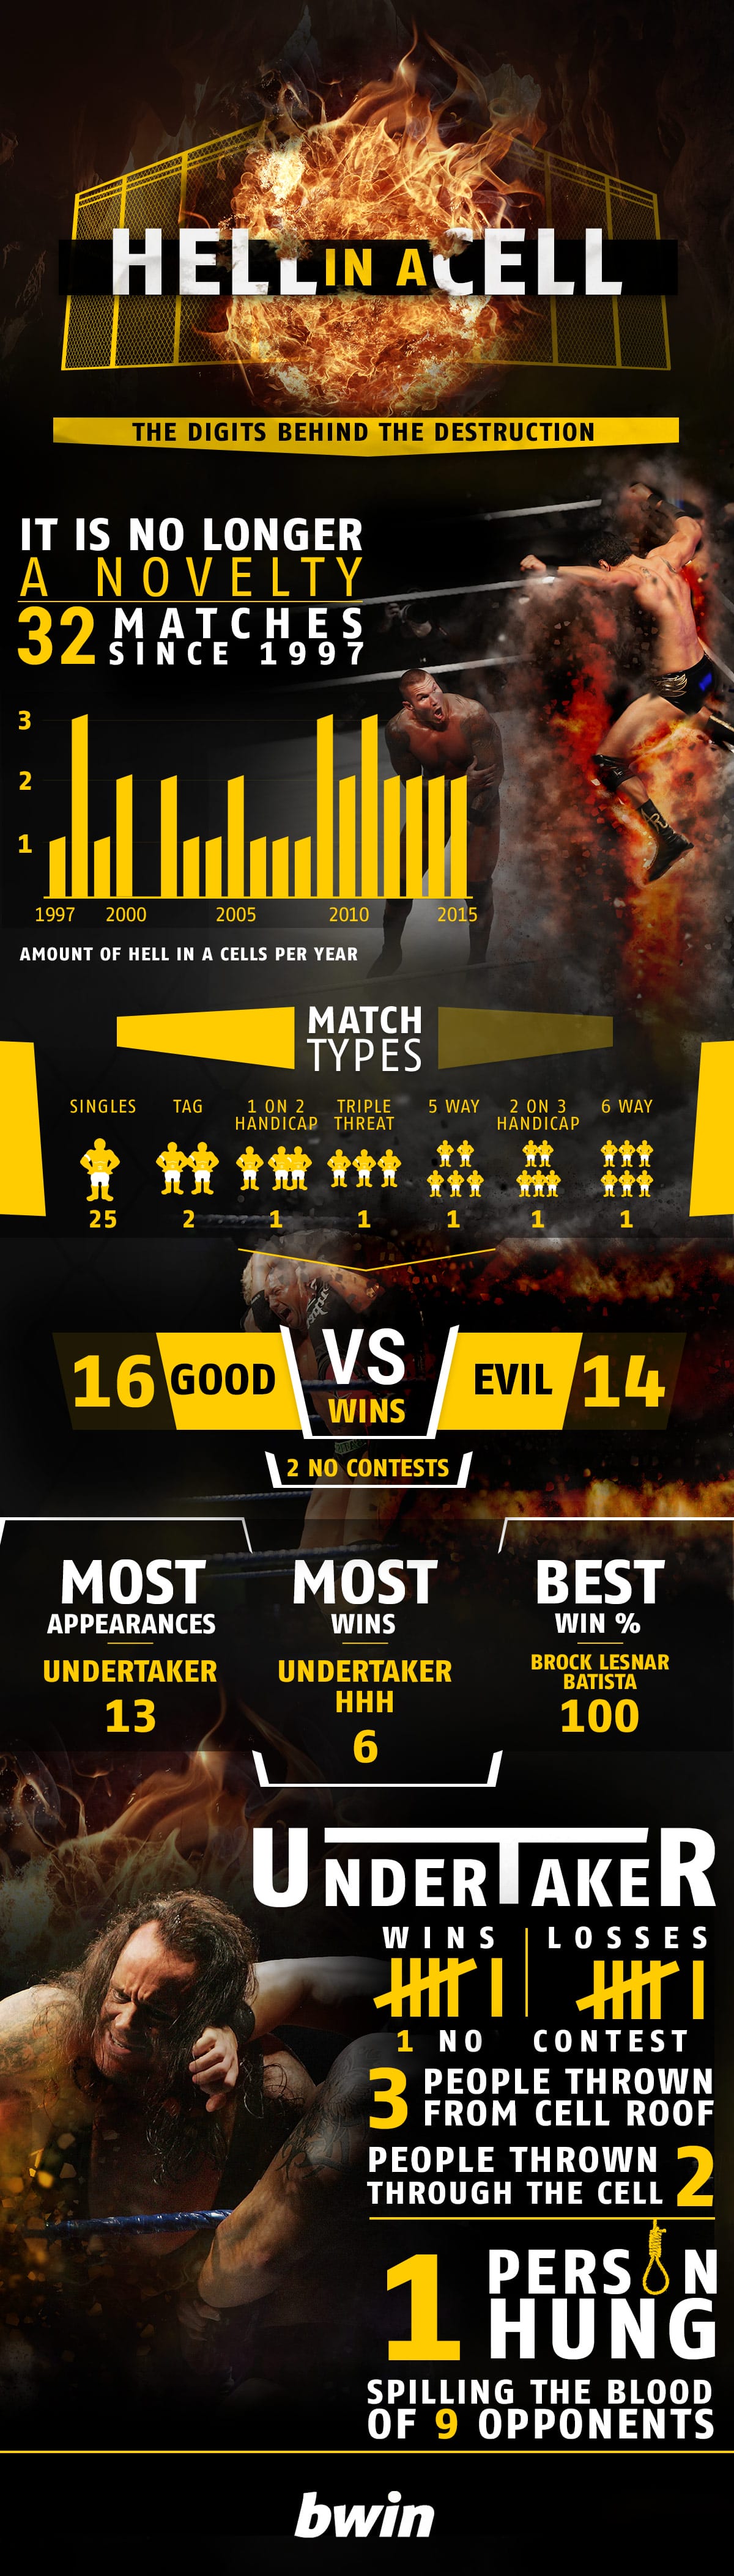 Bwin-WWE-Hell-in-a-cell-V6